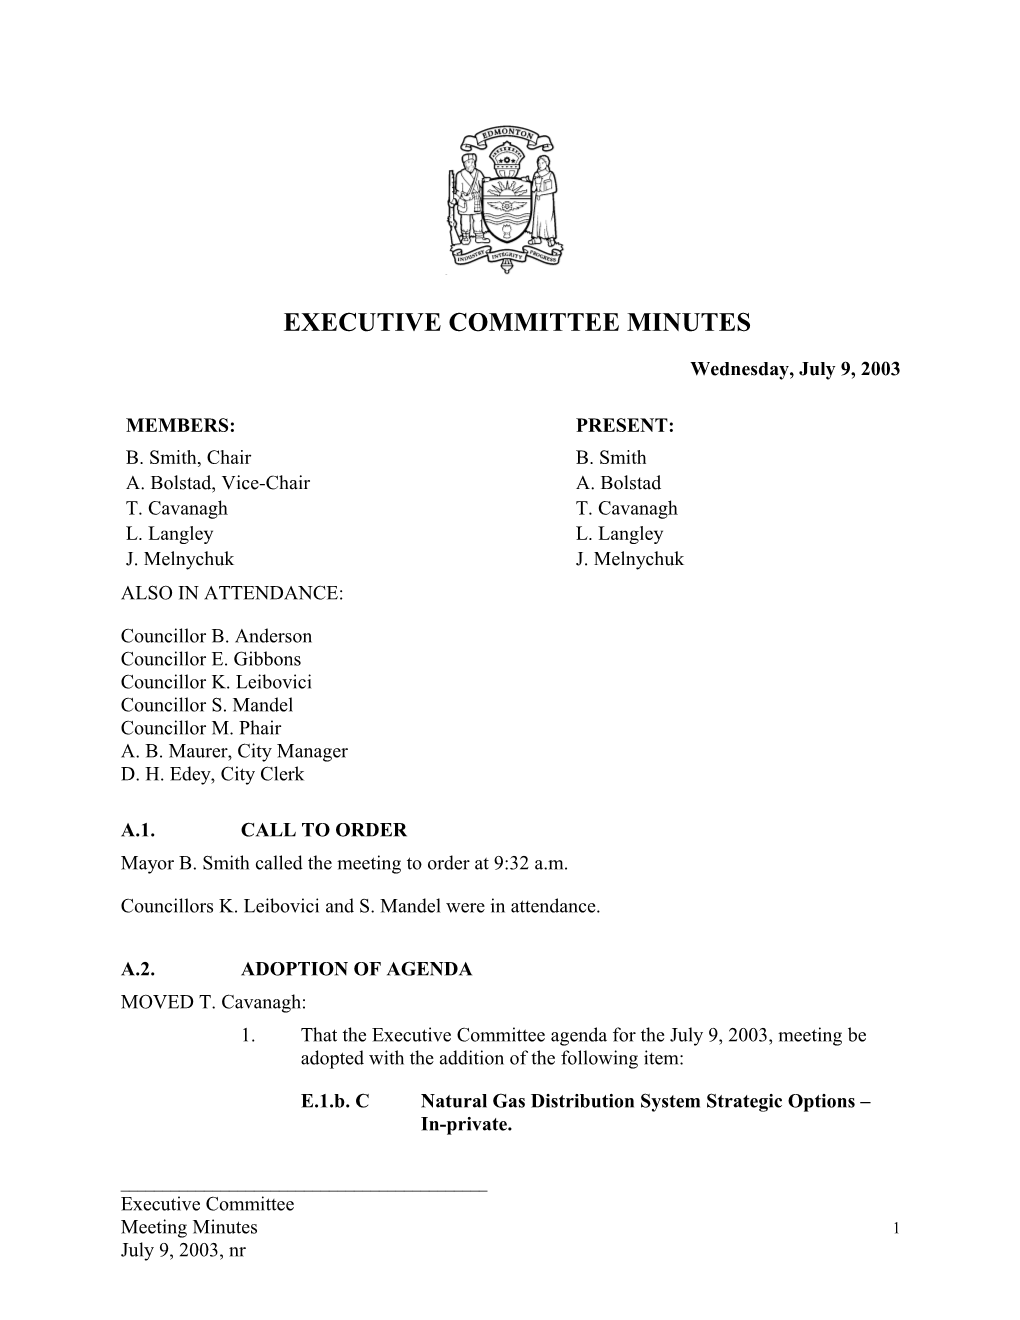 Minutes for Executive Committee July 9, 2003 Meeting